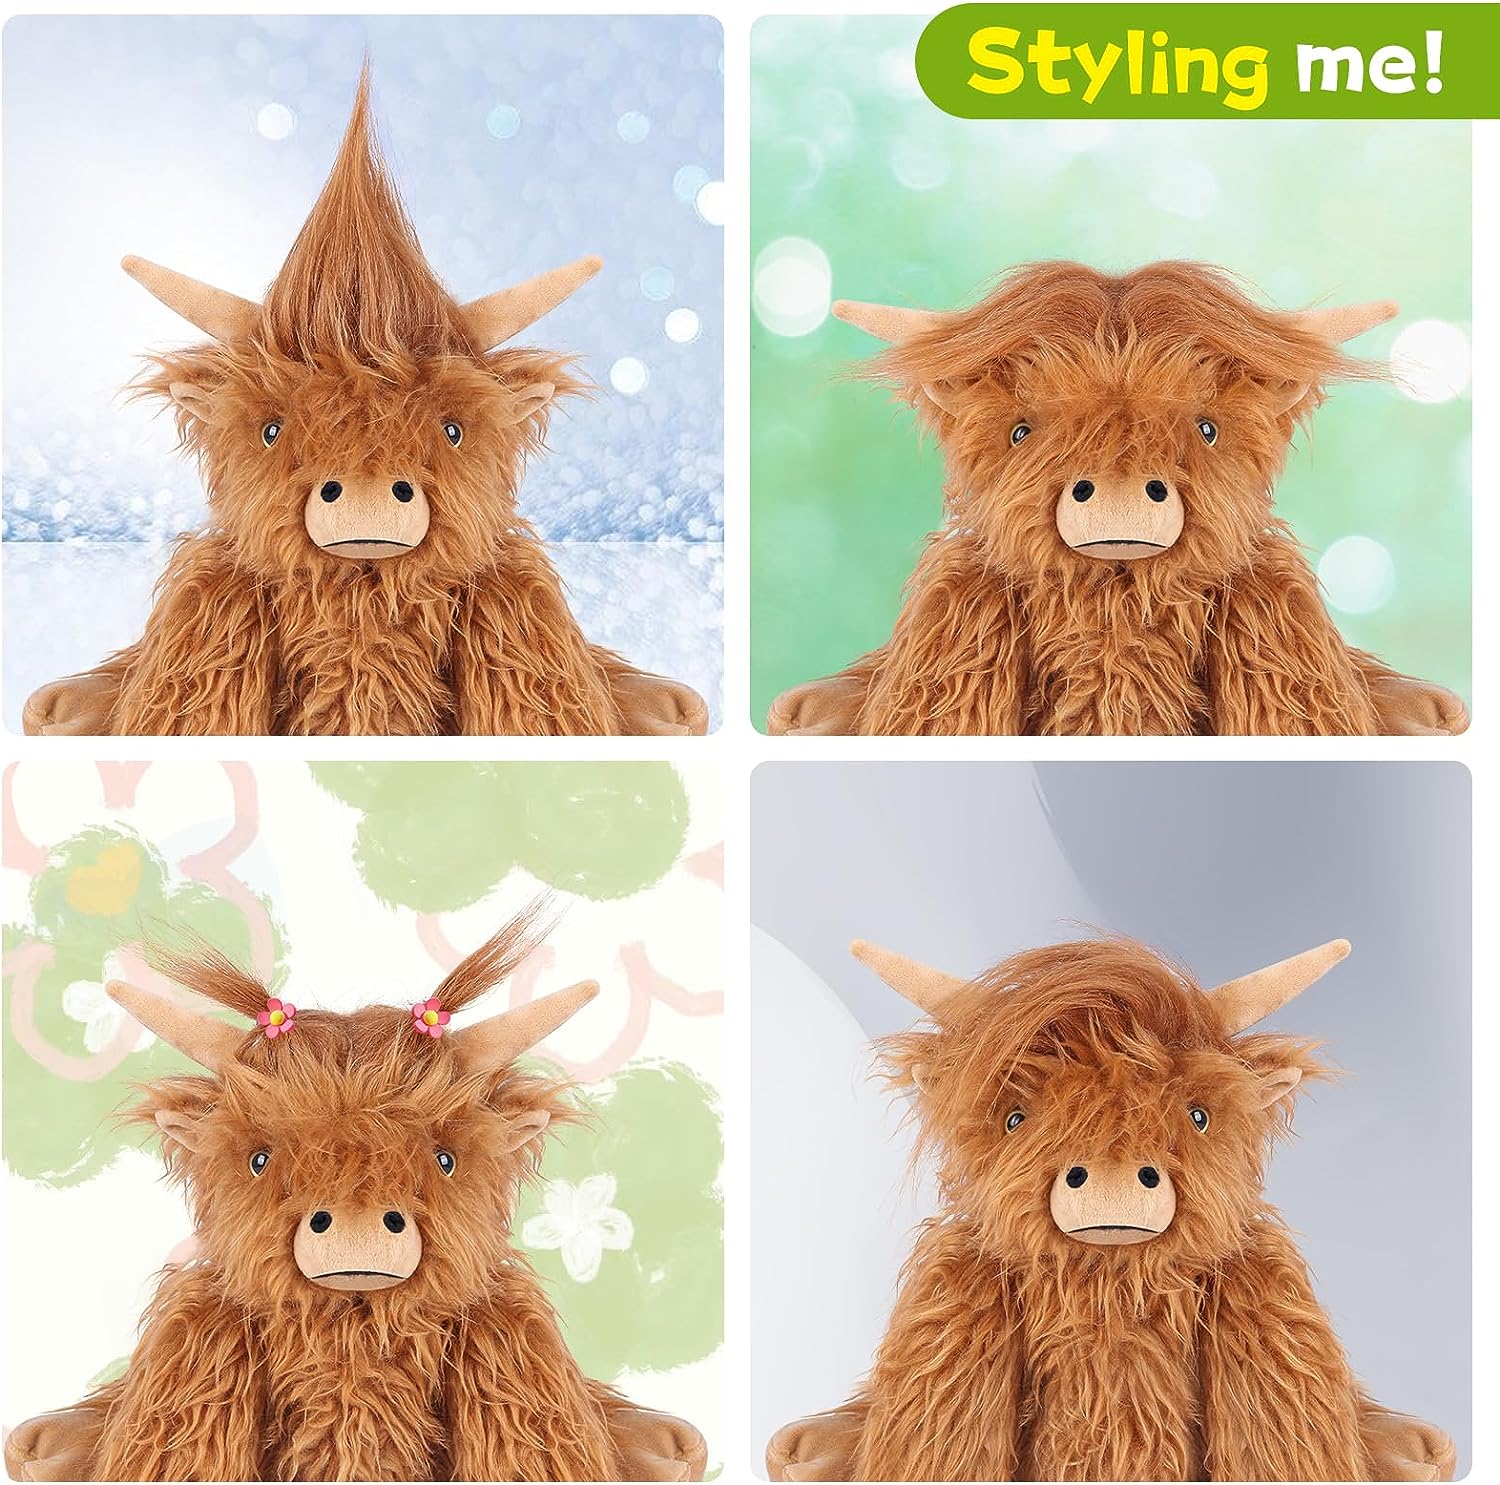 SuzziPals Highland Cow Stuffed Animals, Microwavable Stuffed Animals Heating Pad for Cramps and Pain Relief, Lavender Scented Highland Cow Plush for Stress Relief, Cute Stuffed Cow Gifts Plush Toys